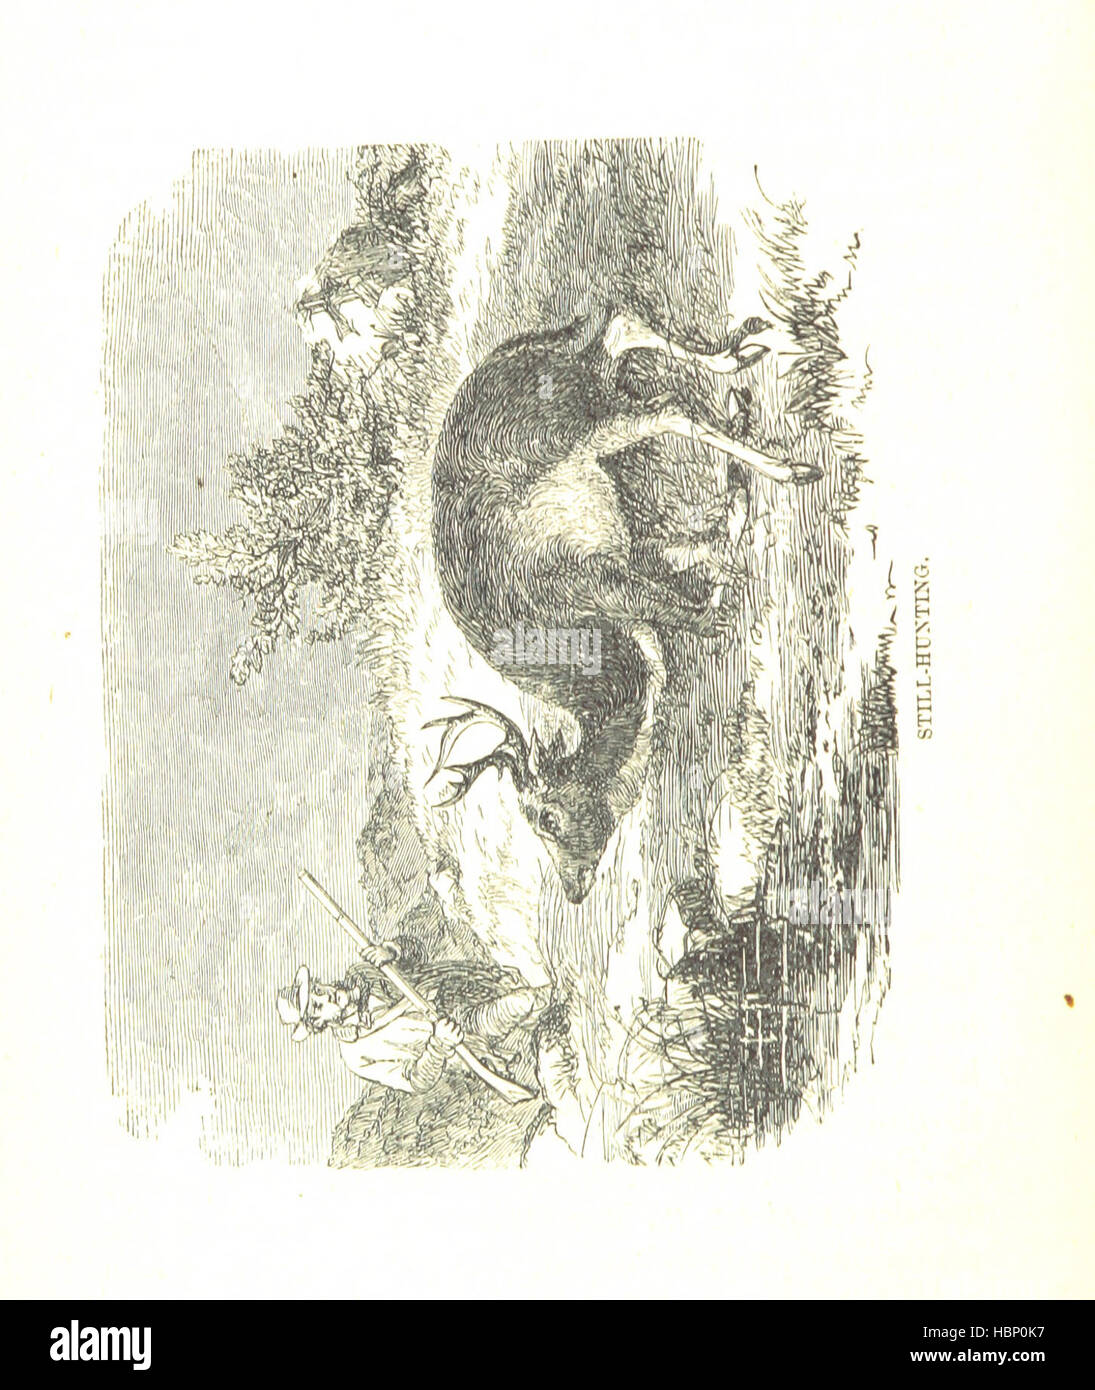 Image taken from page 90 of 'Journal of Army Life' Image taken from page 90 of 'Journal of Army Life' Stock Photo